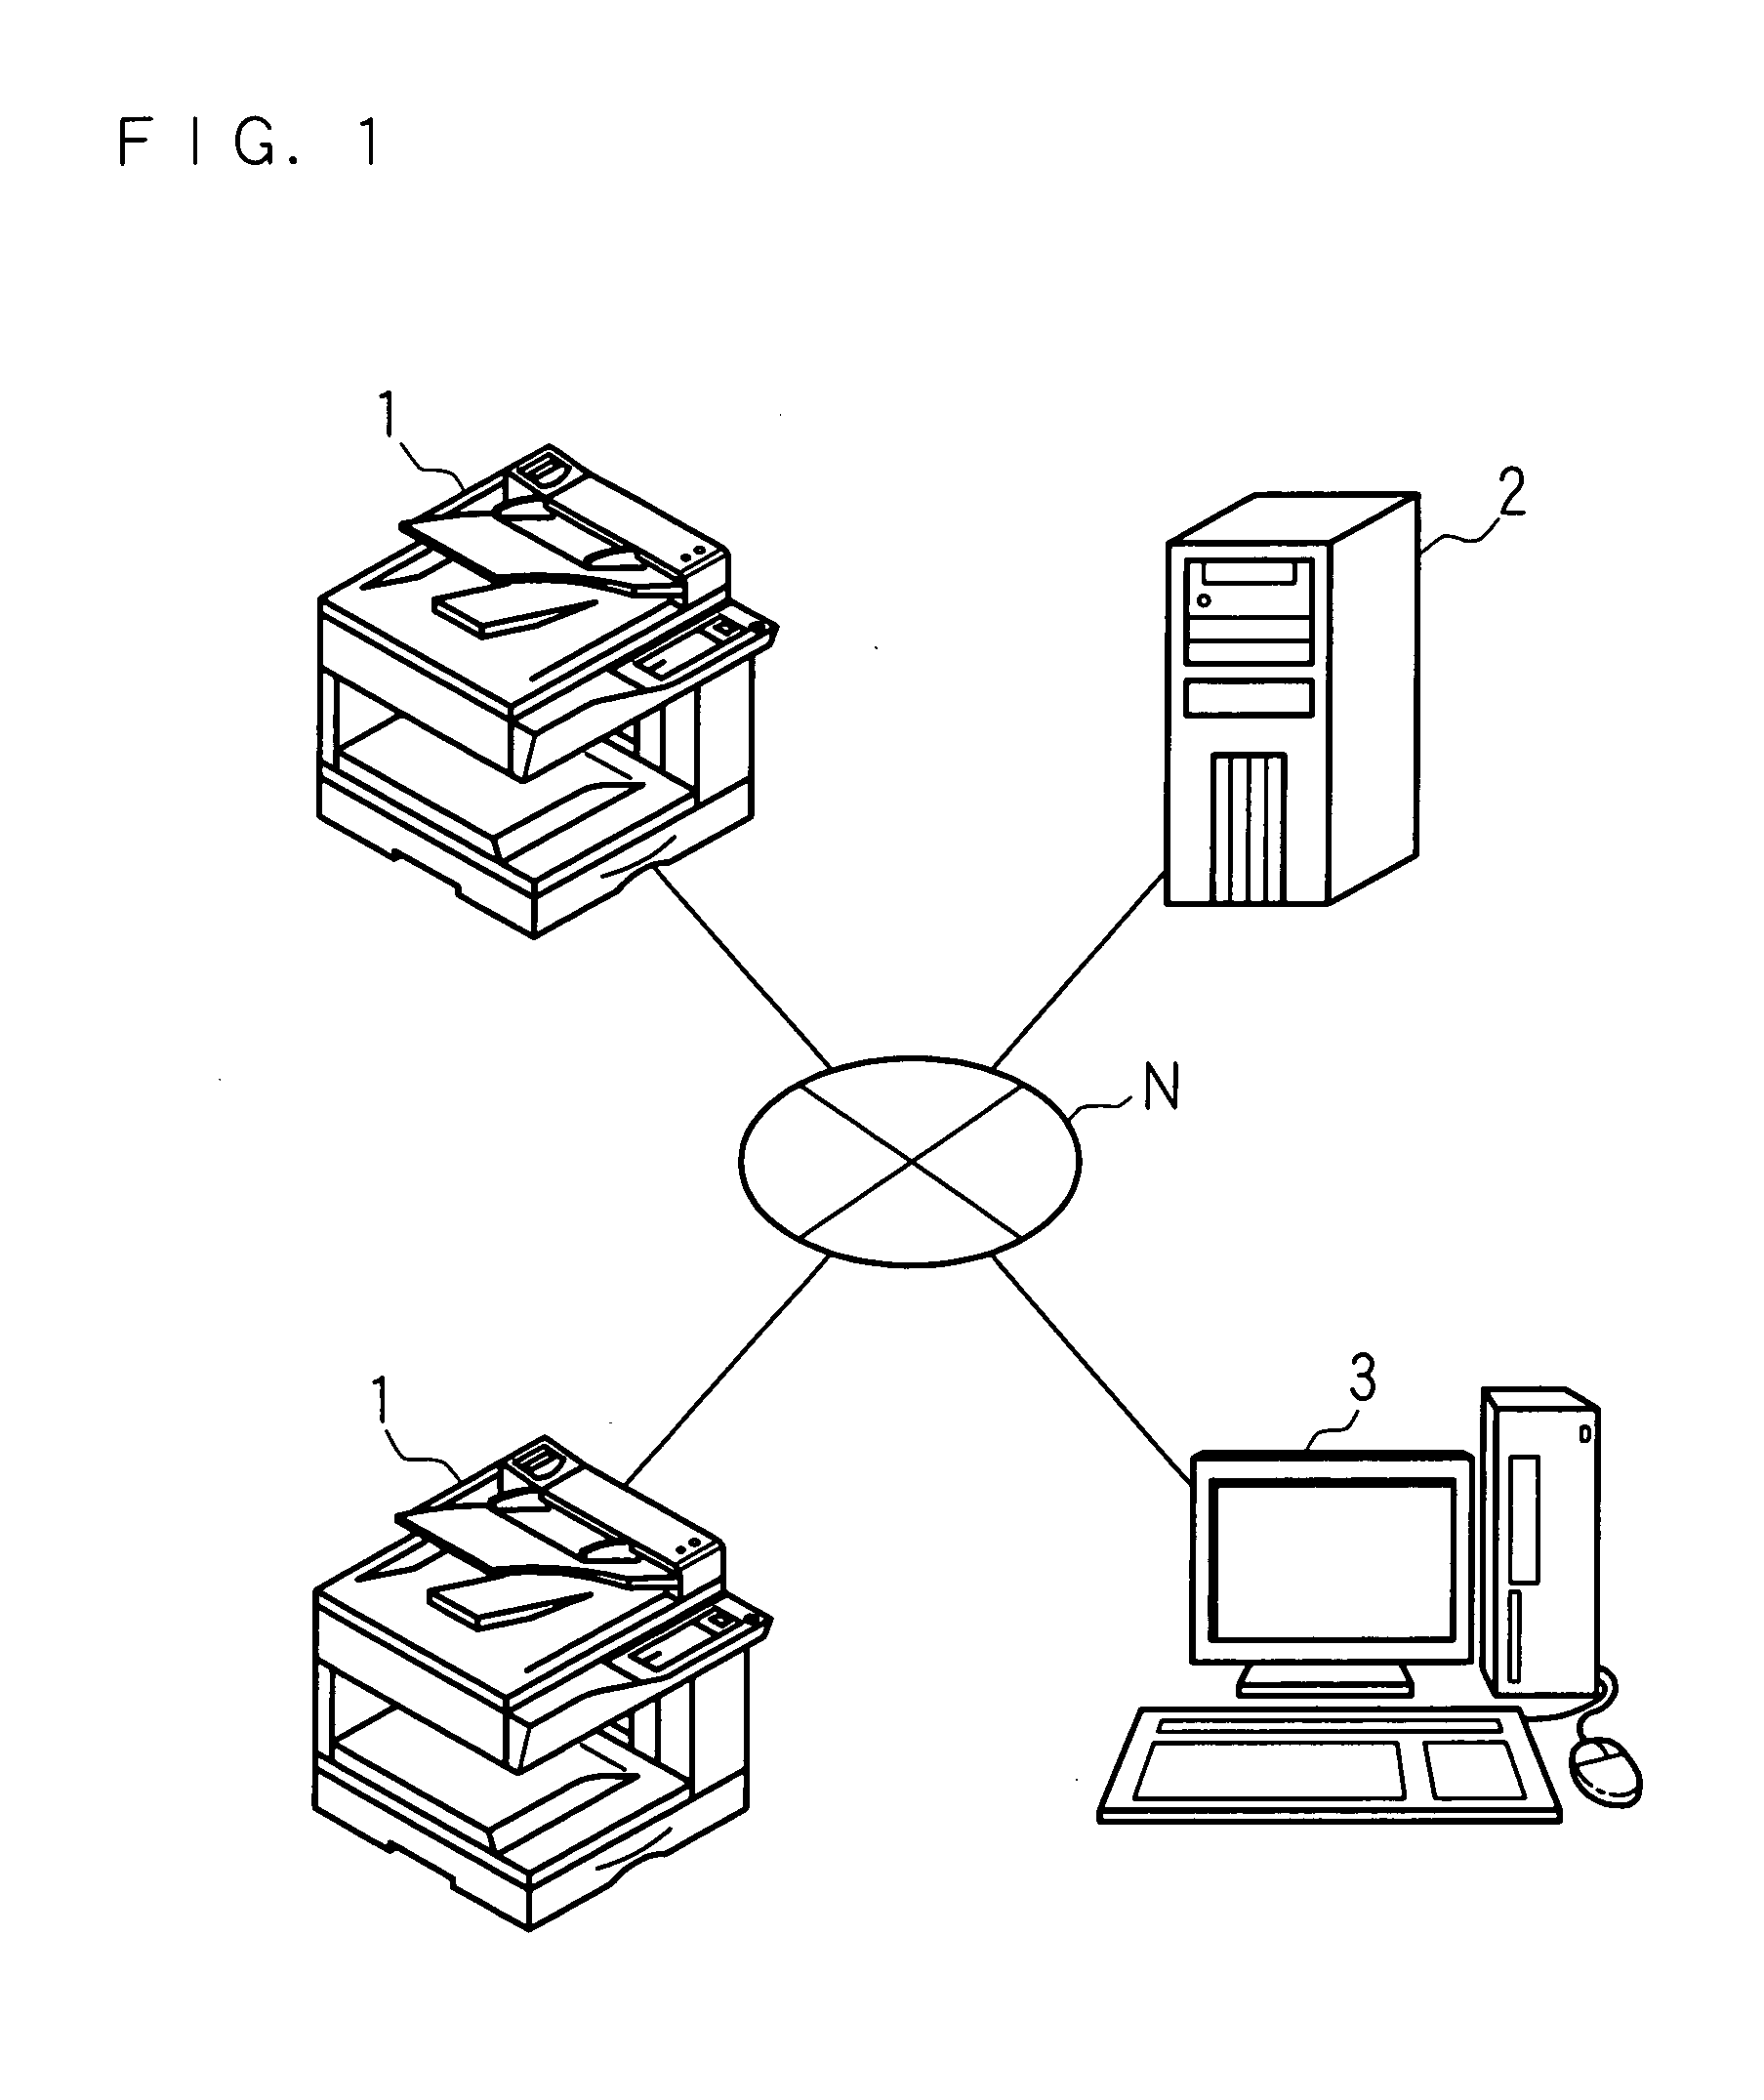 Image processing system, image processing apparatus and judgment apparatus